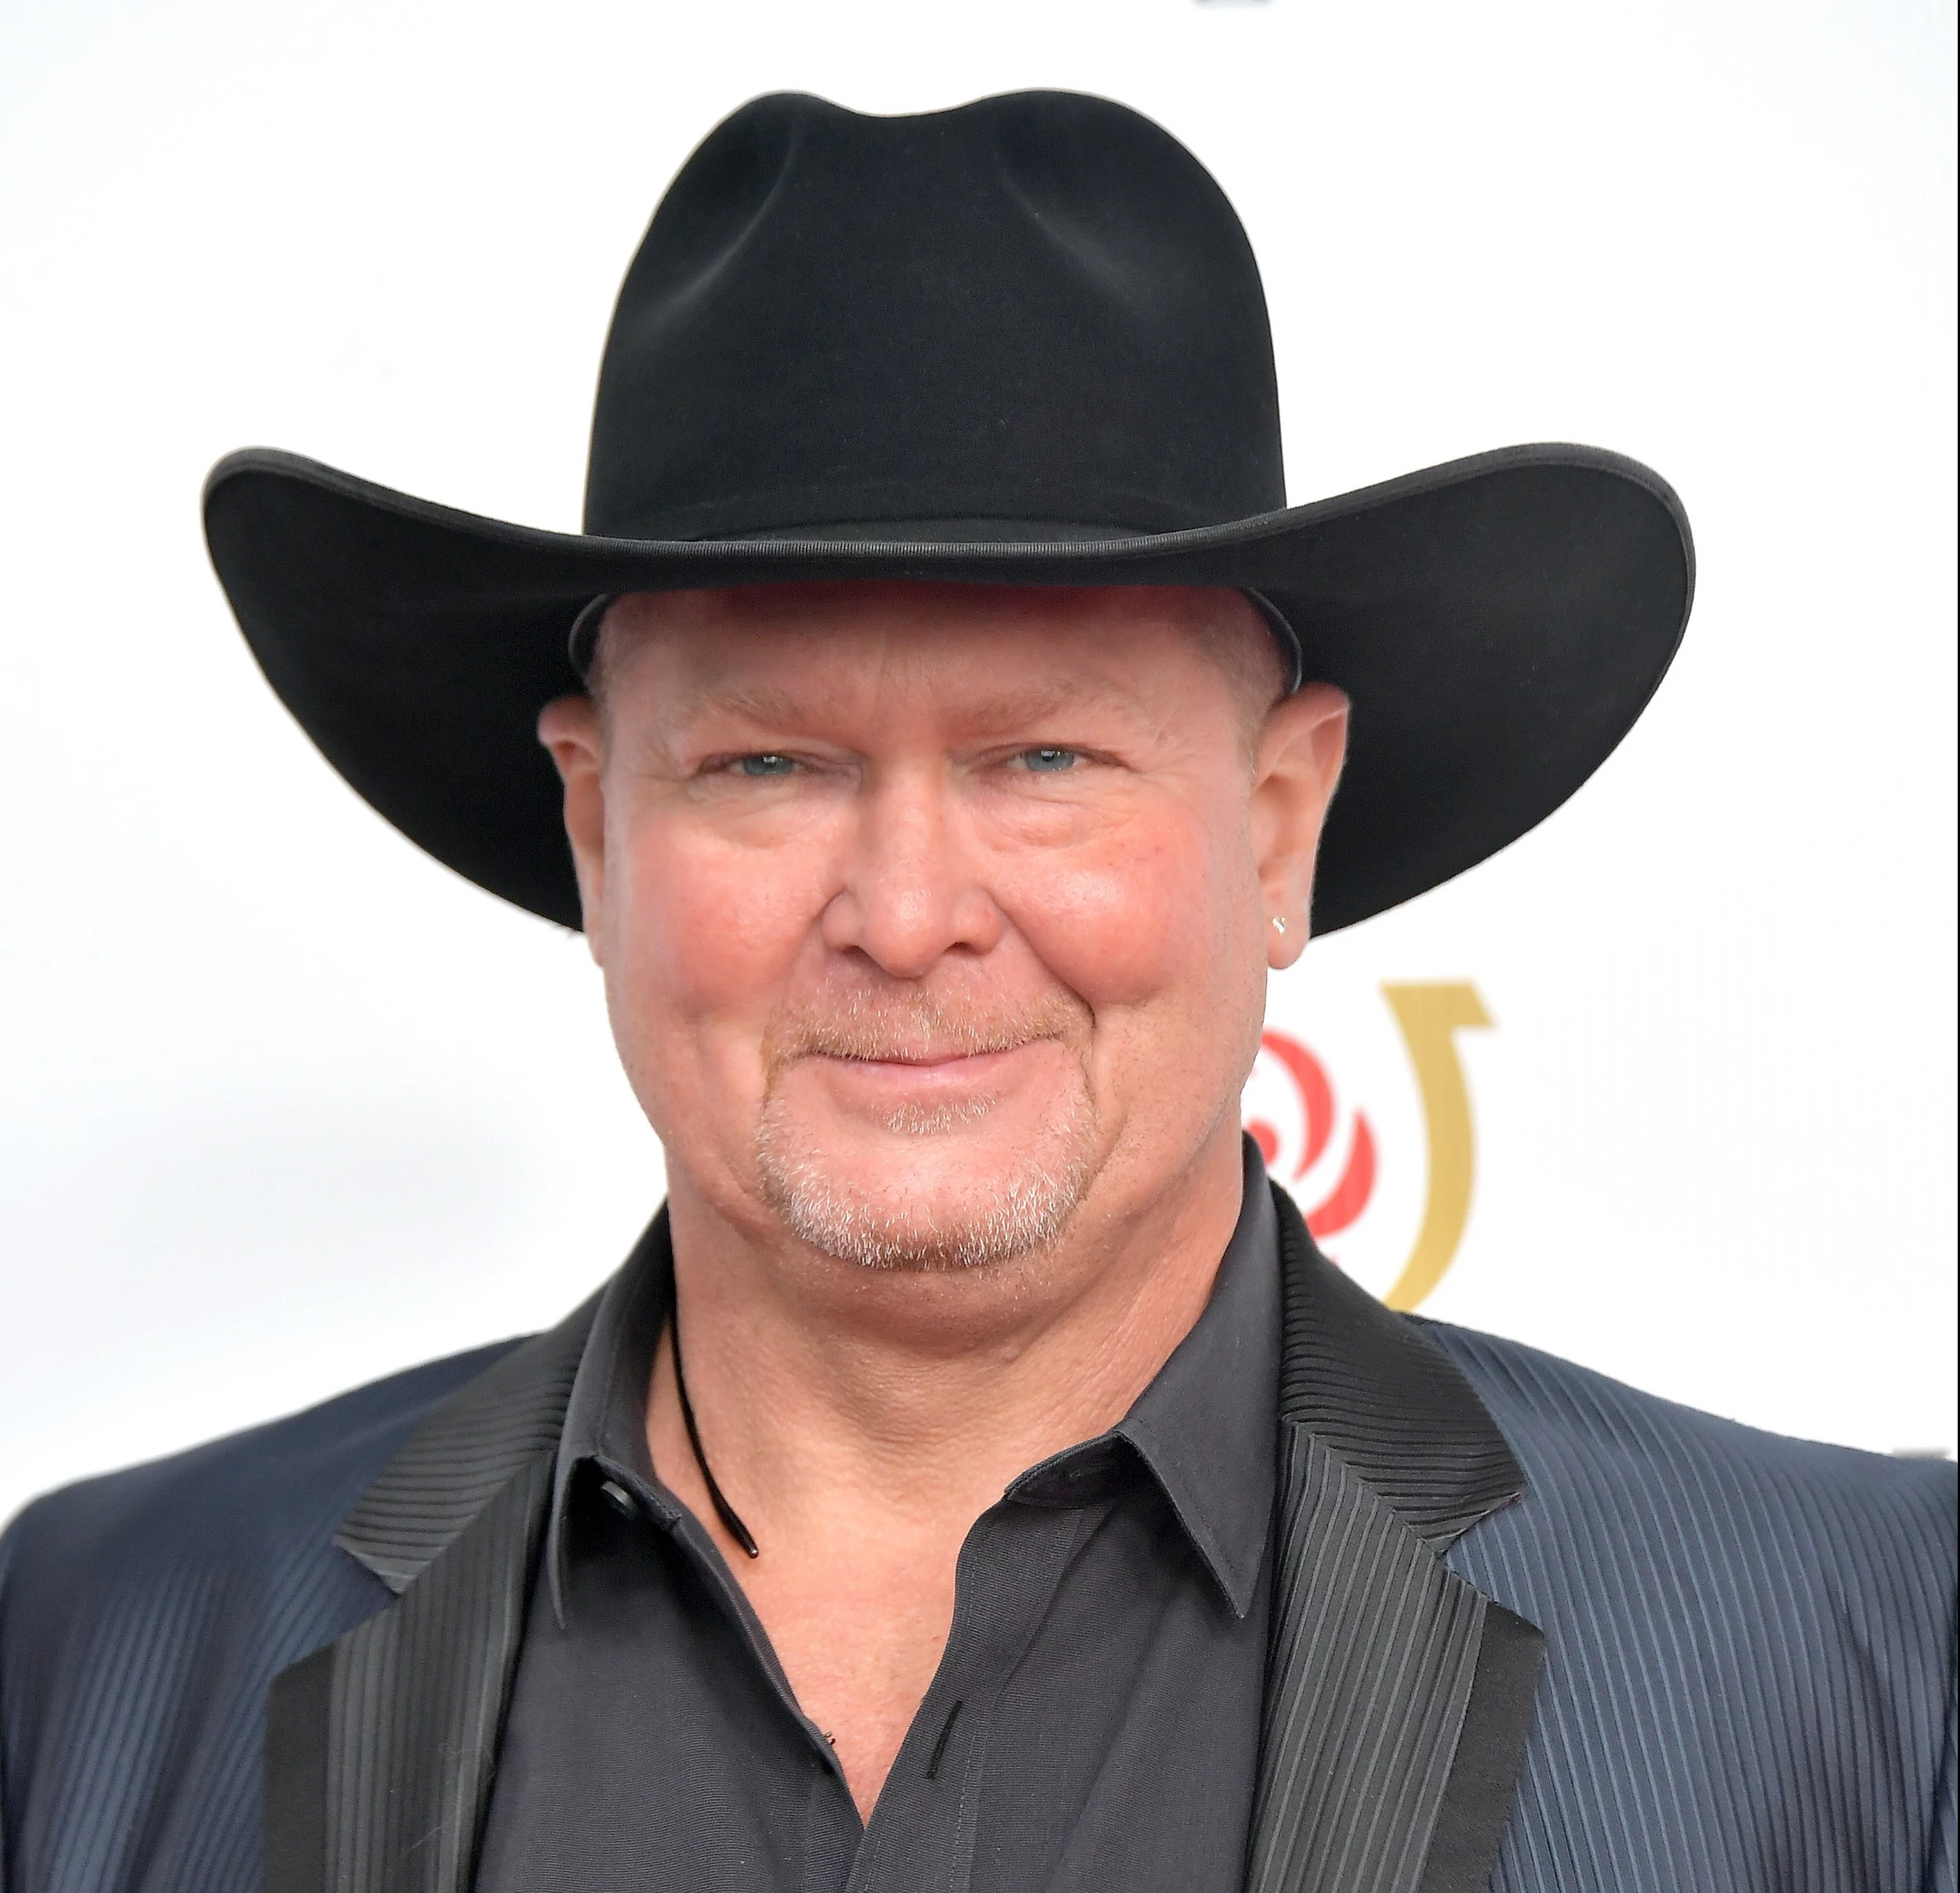 https://townsquare.media/site/71/files/2015/03/Tracy-Lawrence-Getty-e1565630861773.jpg